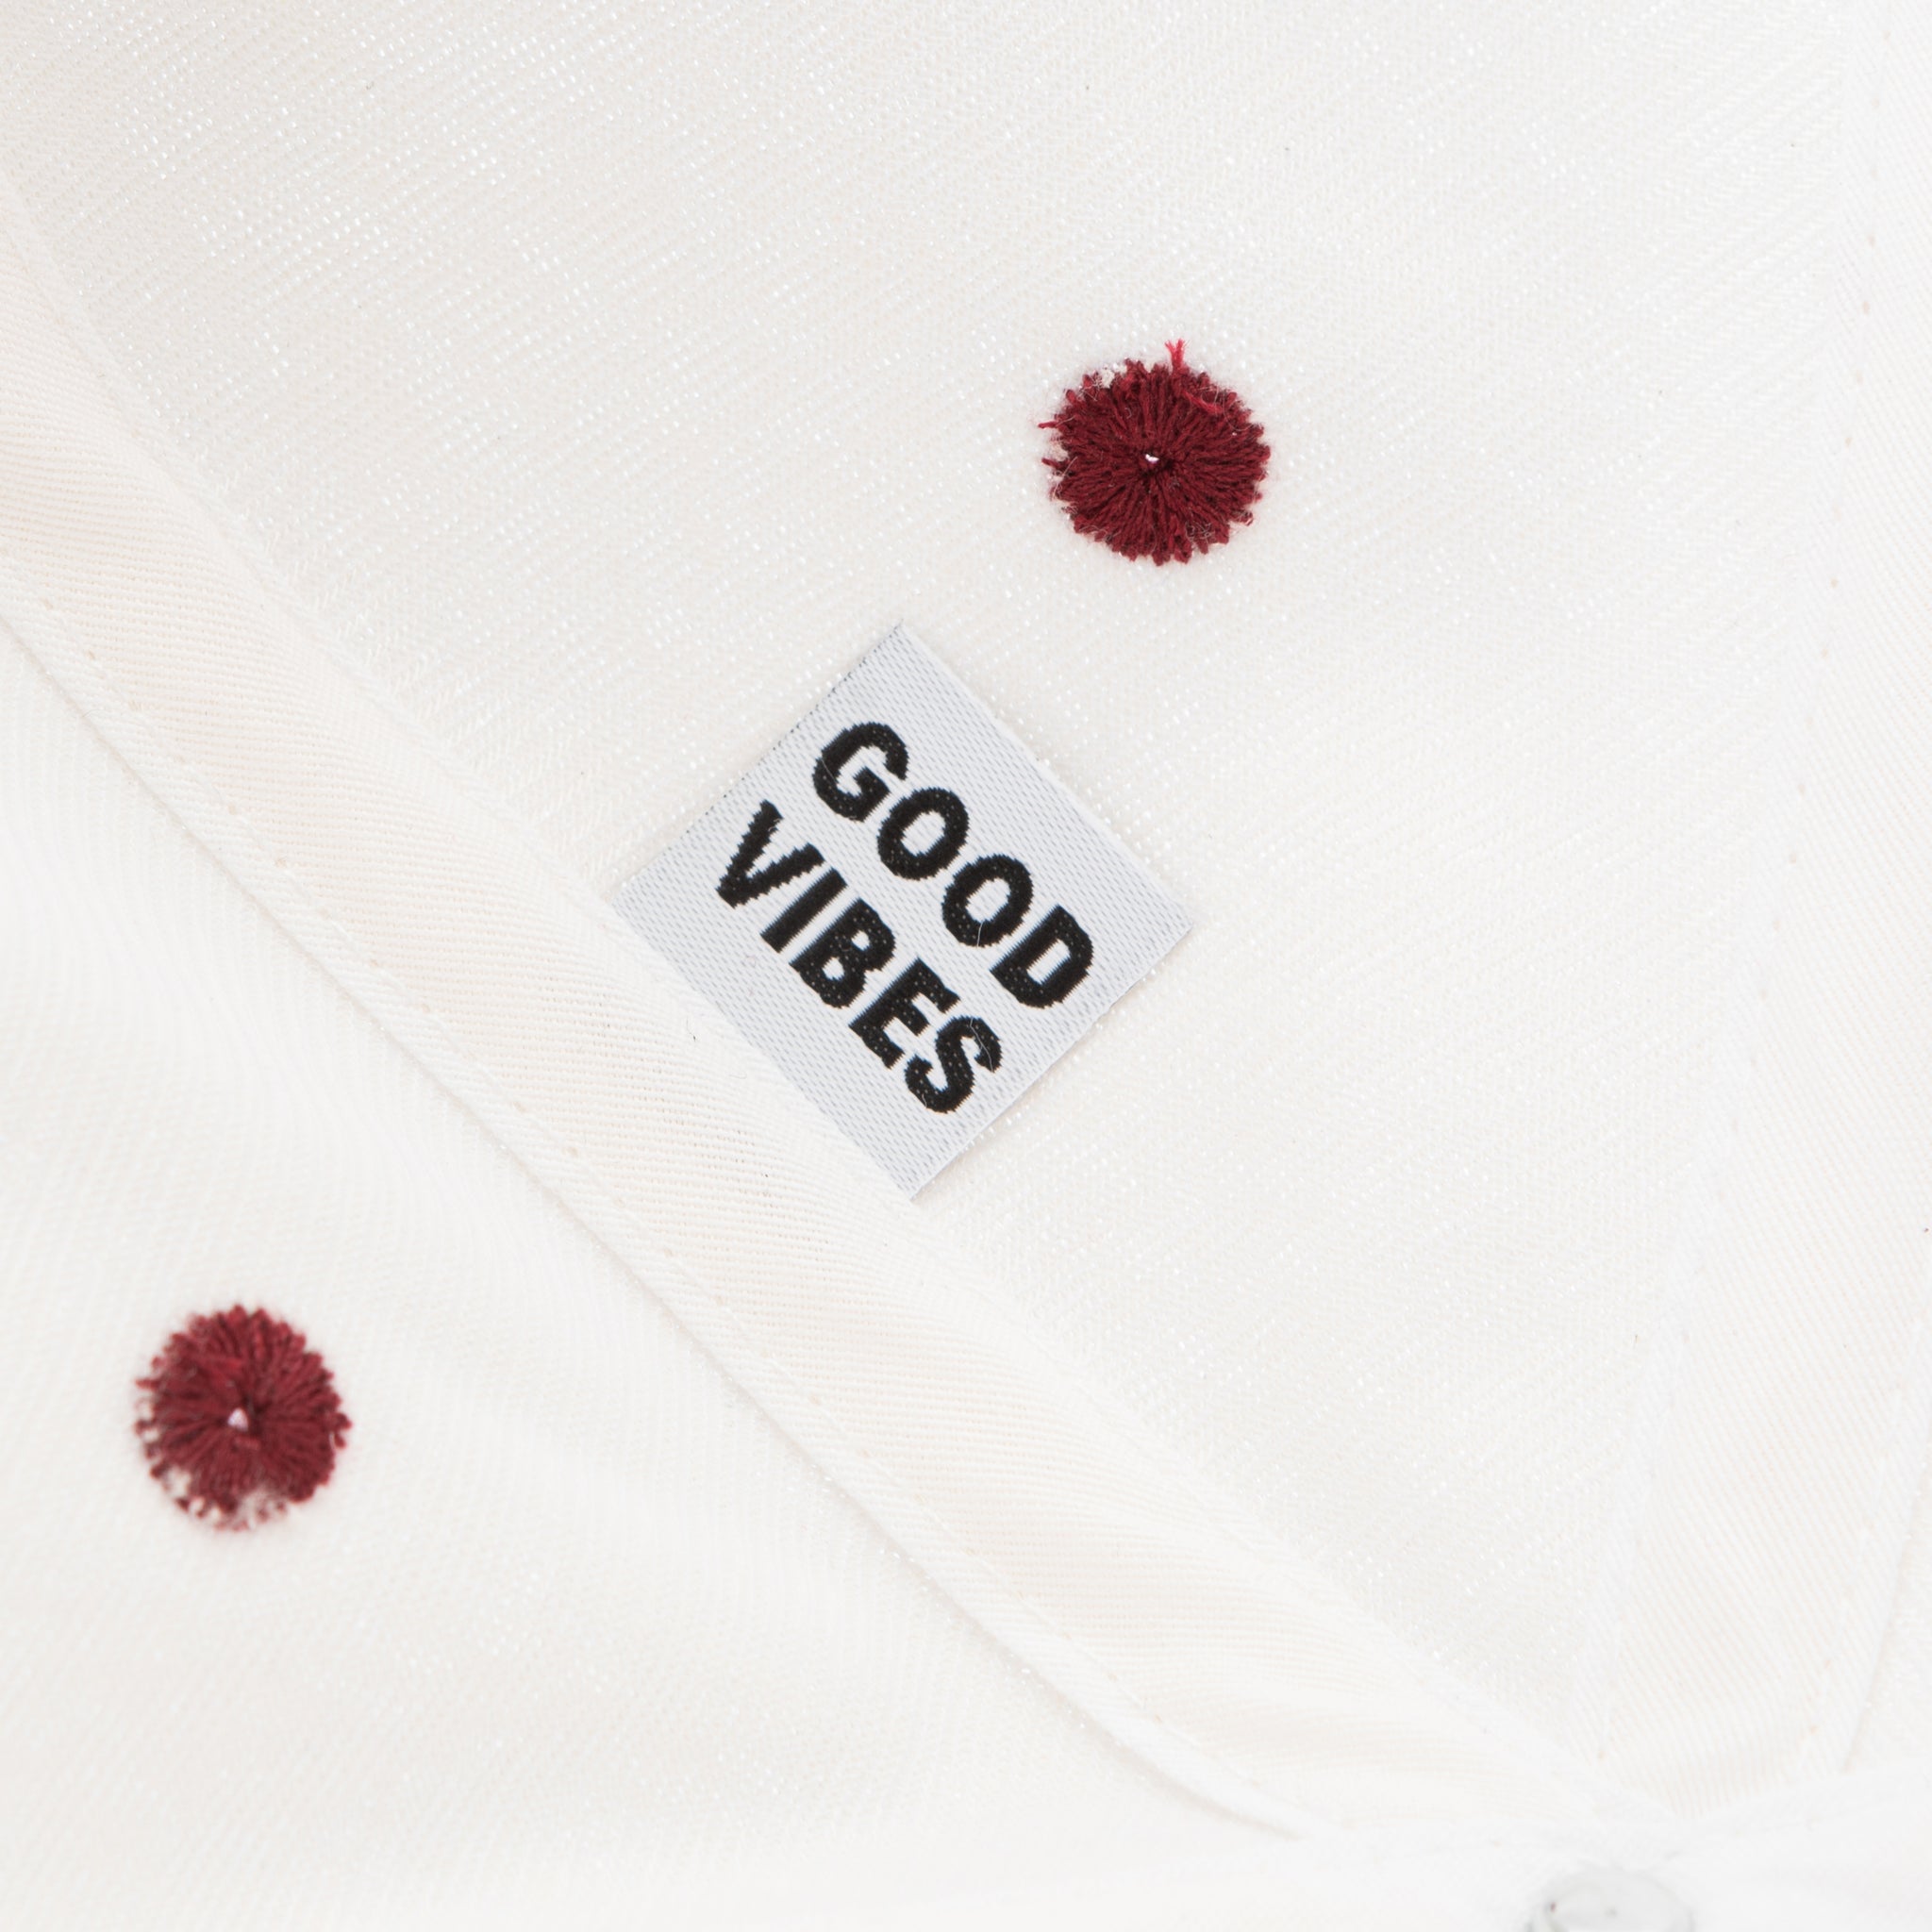 Close up of hat detail: tag that reads "good vibes"